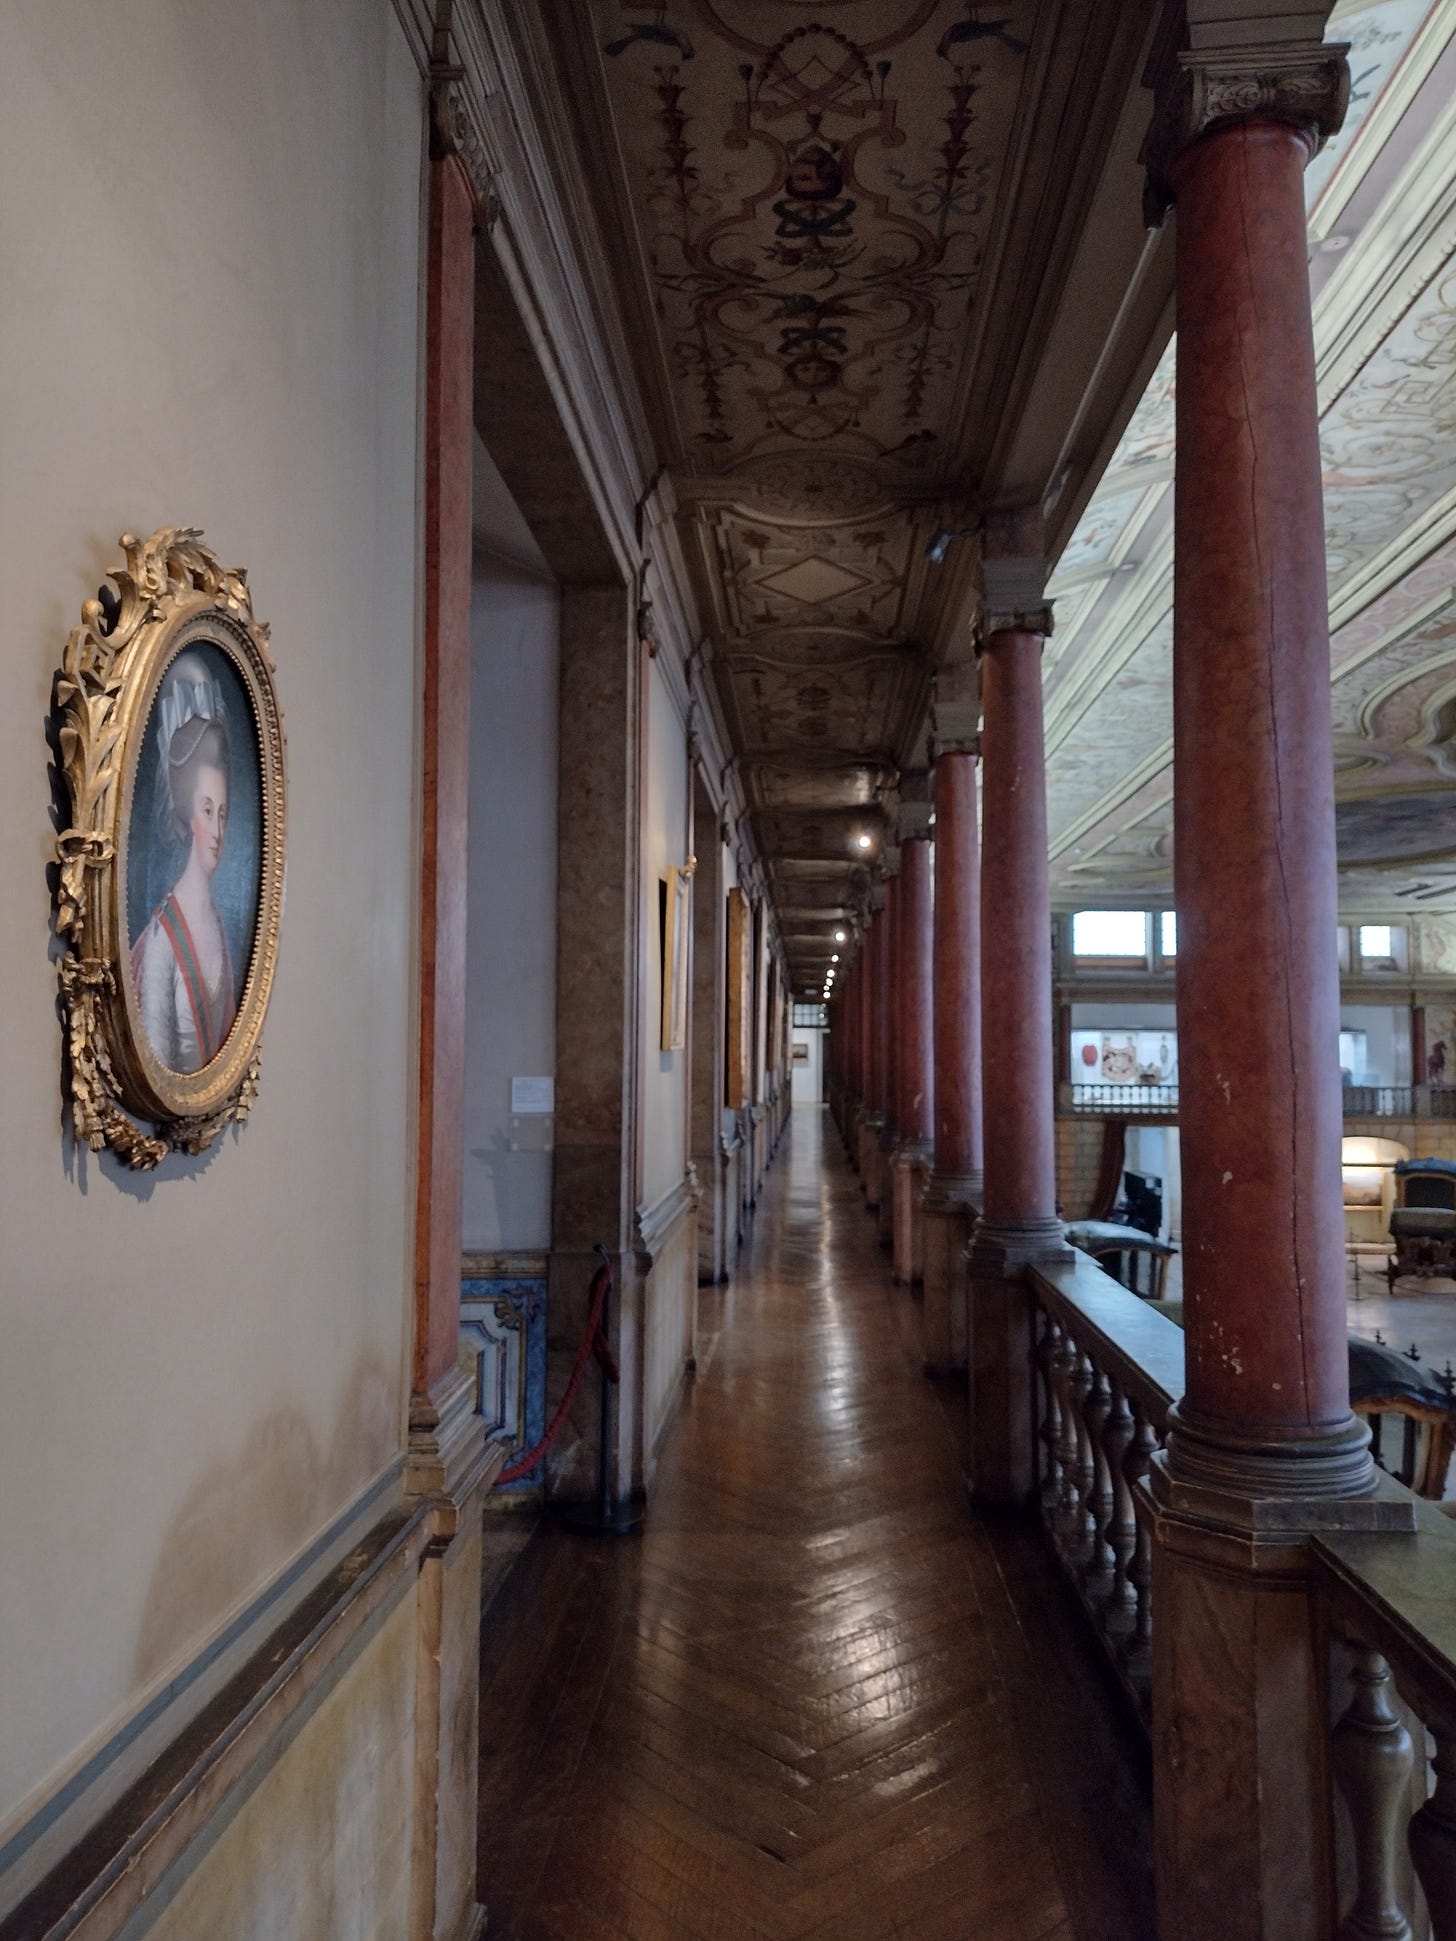 Hallway image of the second floor of the Royal Riding School.